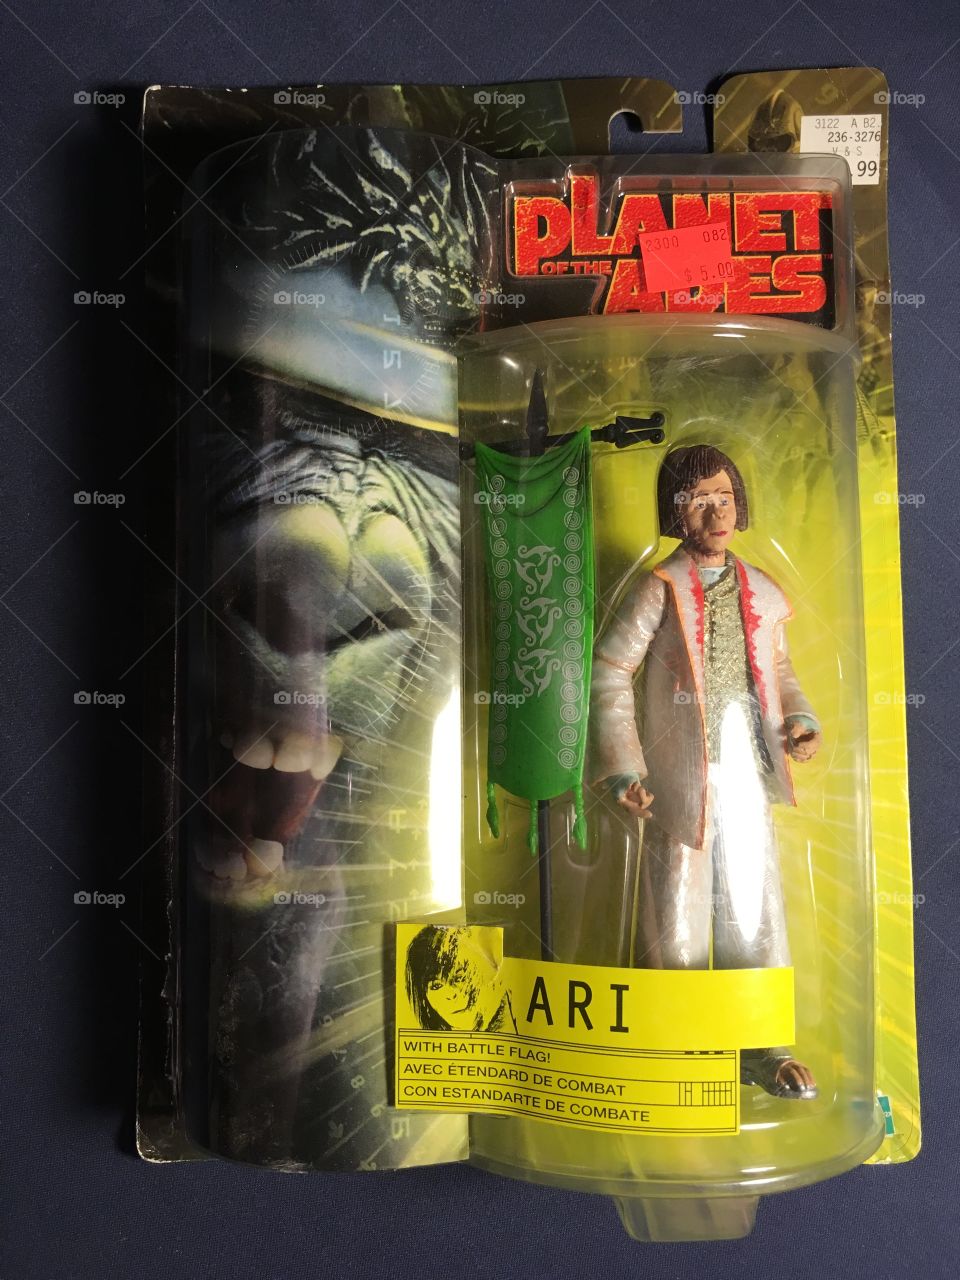 Ari - Planet of the Apes - Action Figure
Released - 2001